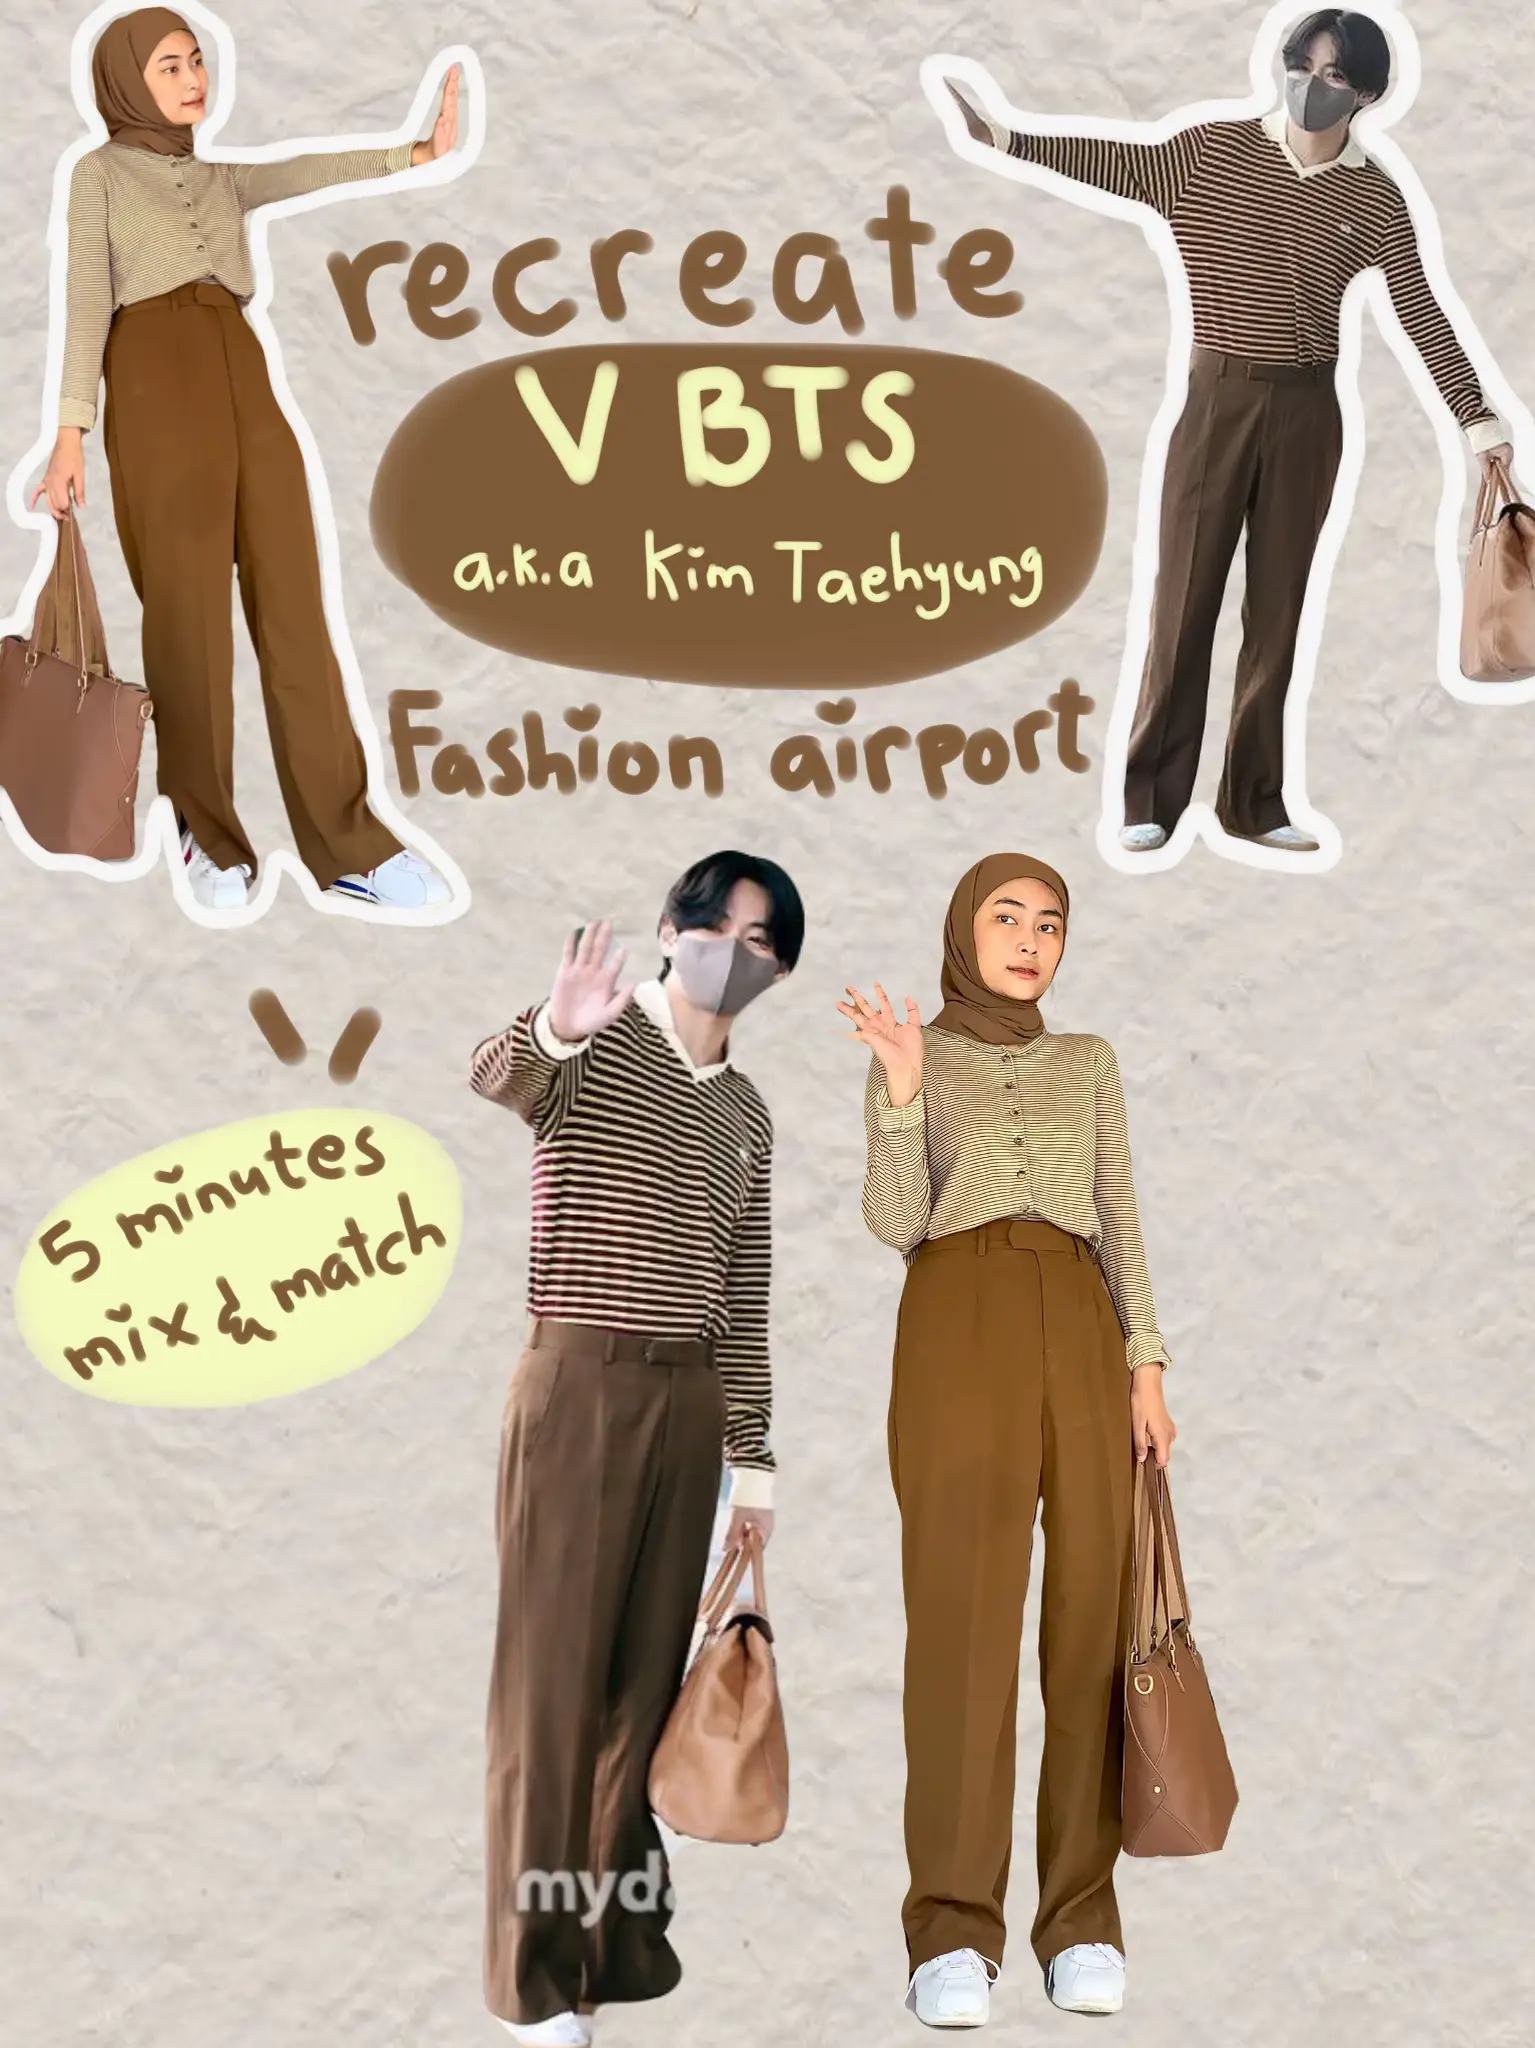 Loved Taehyung's airport look for Paris? Here are 8 airport styles